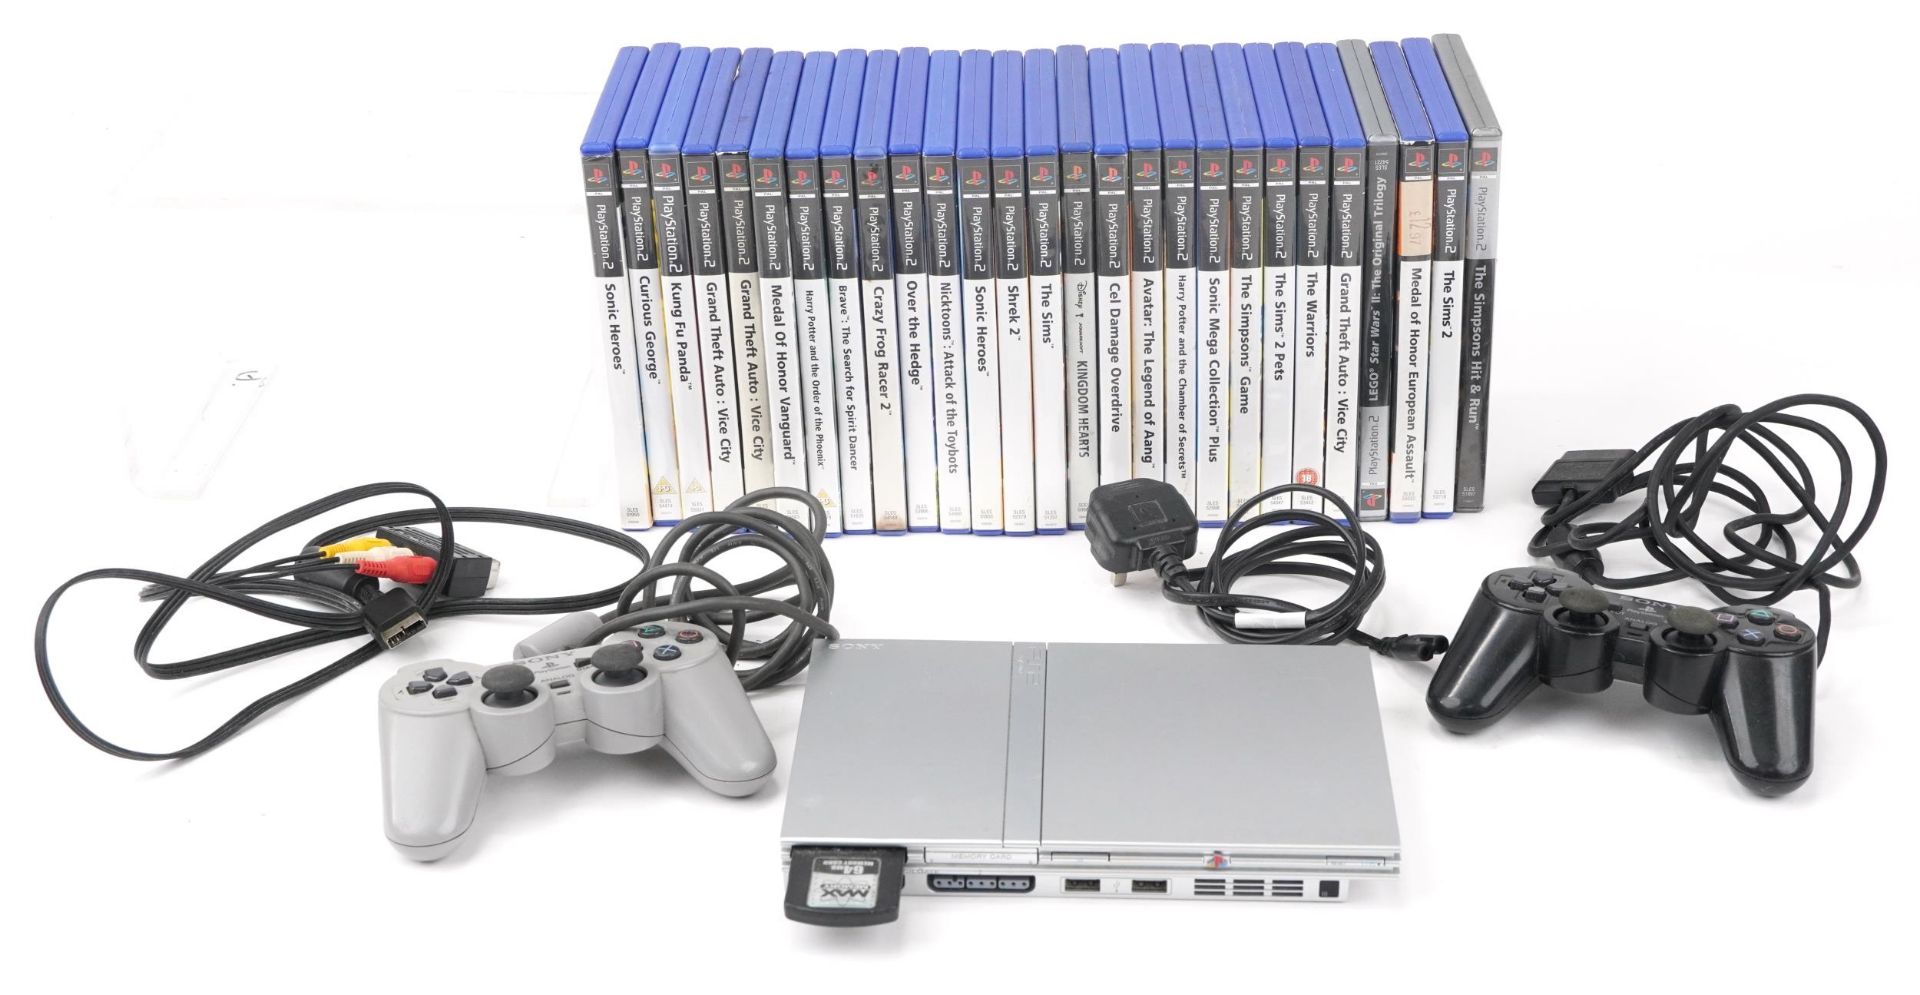 Sony PlayStation 2 games console with controllers and a collection of games